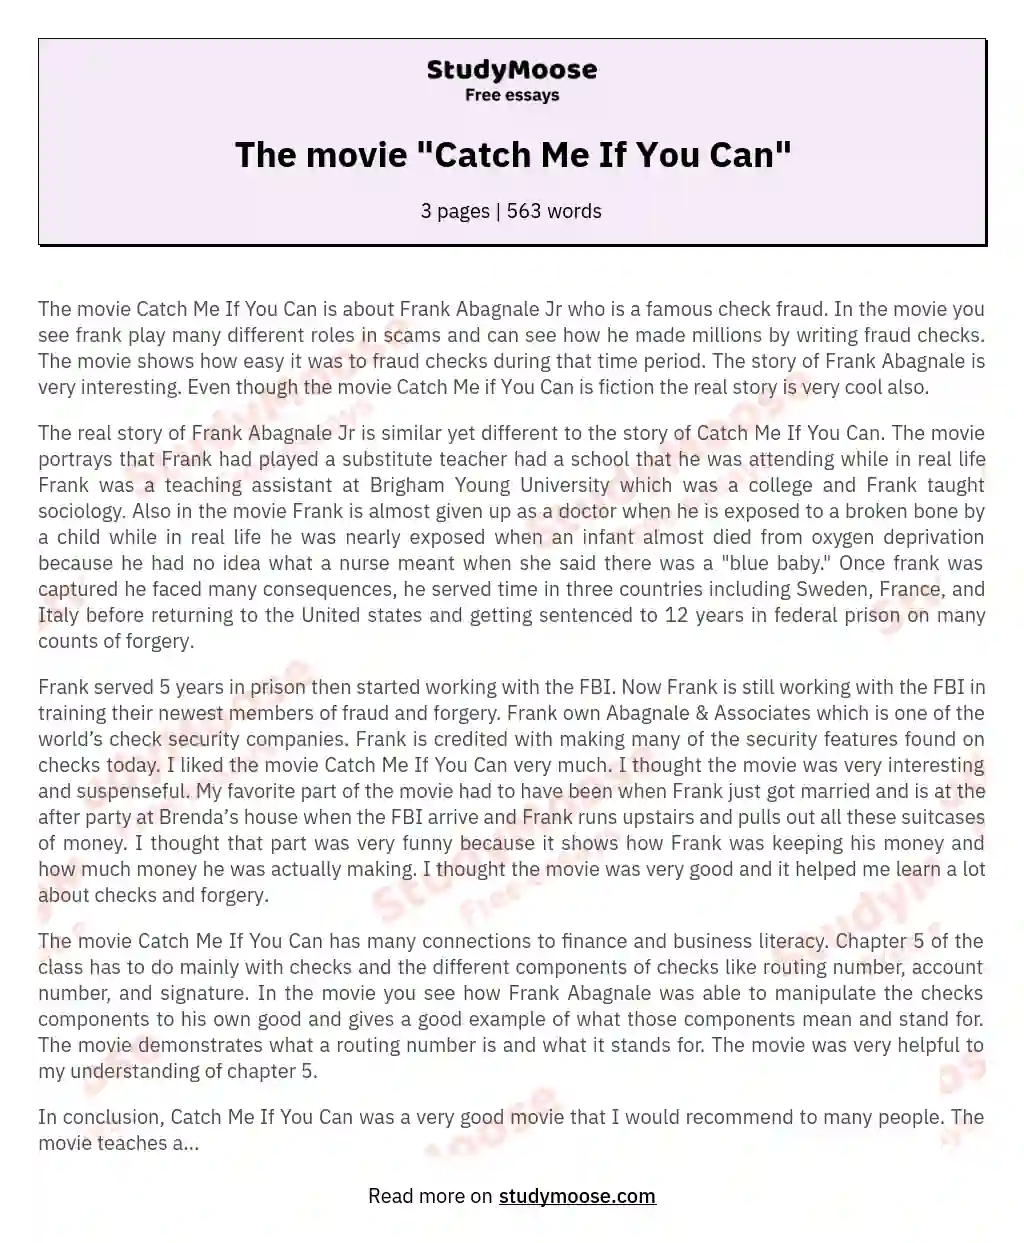 The movie "Catch Me If You Can" essay